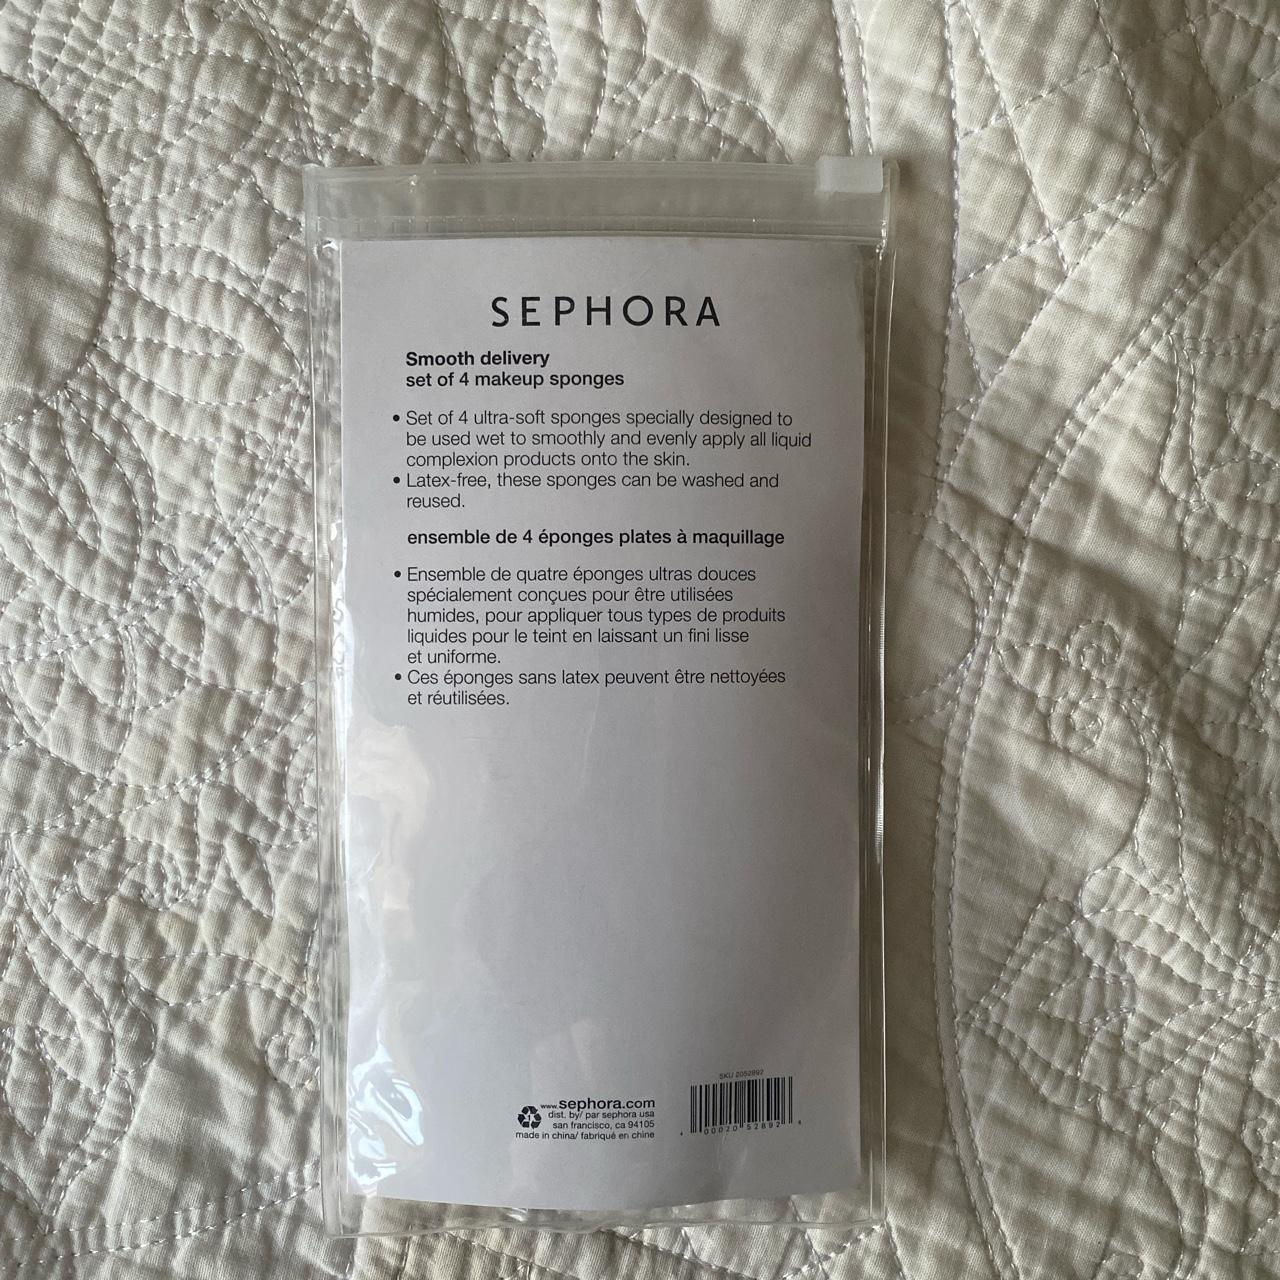 Sephora Women's Pink and Blue Accessory (3)